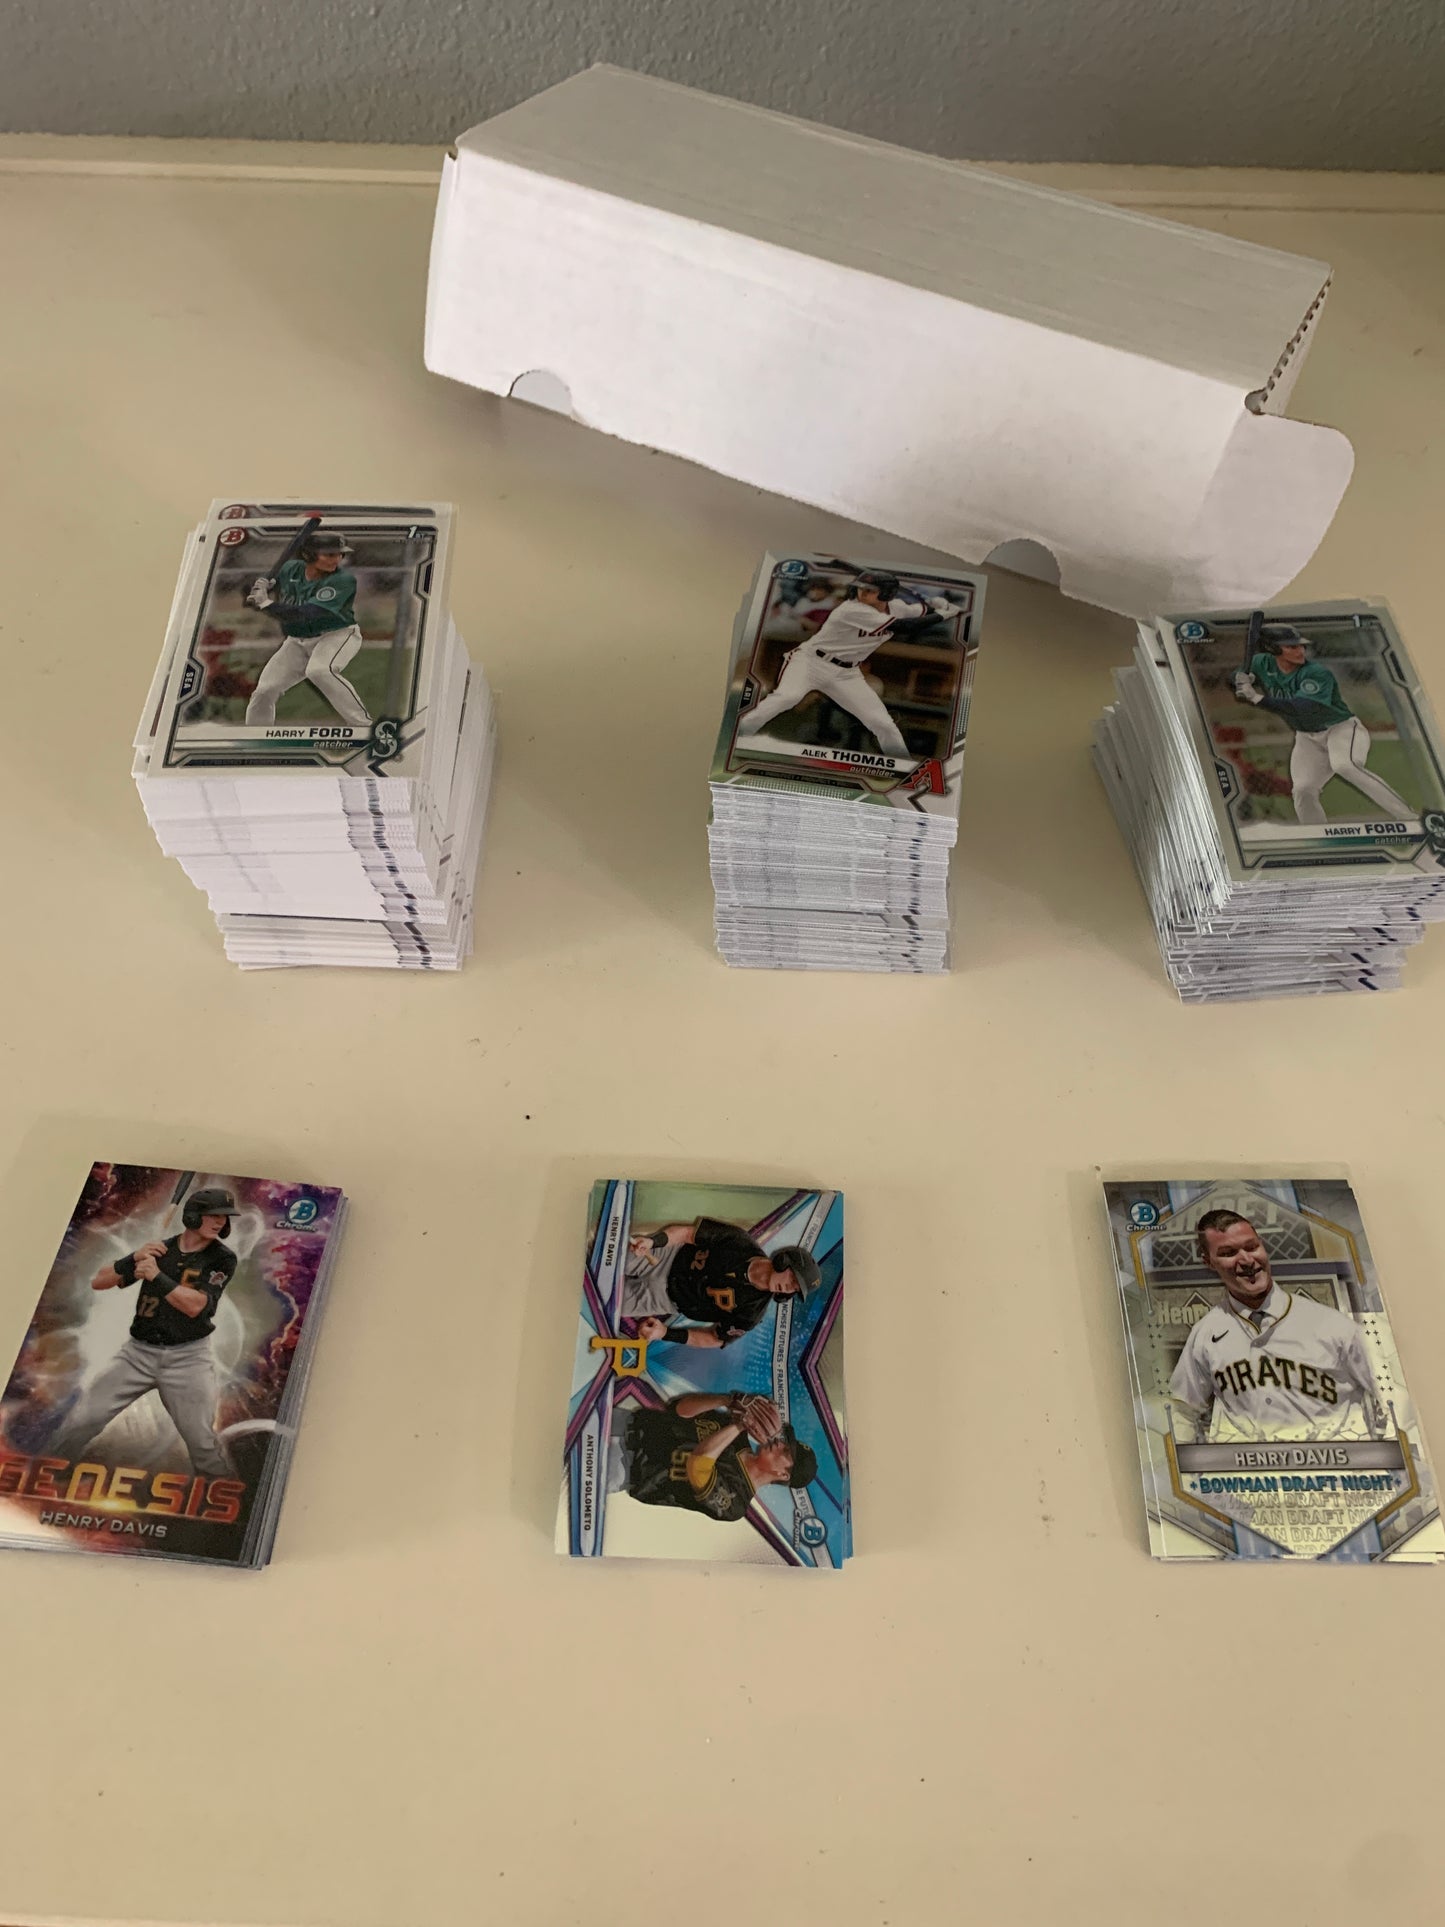 2021 Bowman Draft Baseball Paper and Chrome sets and three insert sets one of a kind collection